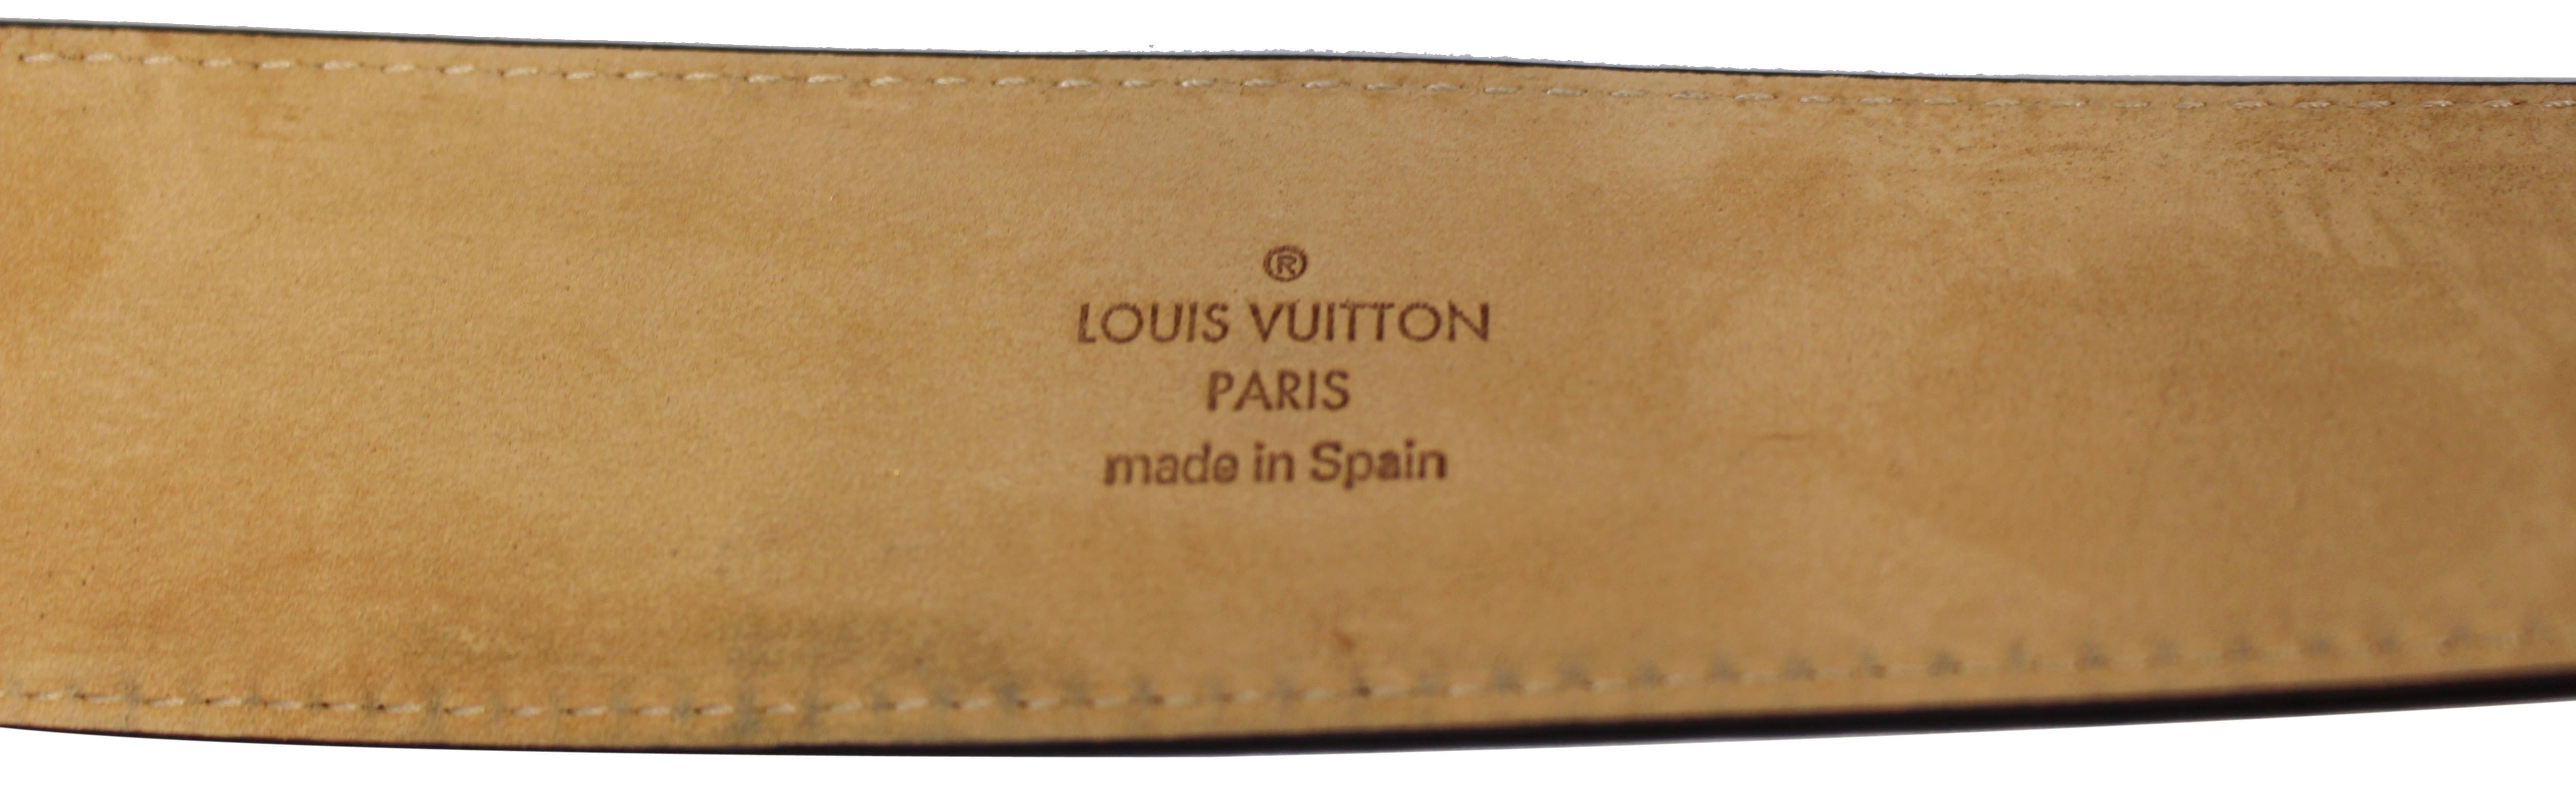 LOUIS VUITTON BELT Pre-Owned Brown Size 100/40 M9608 24k Gold